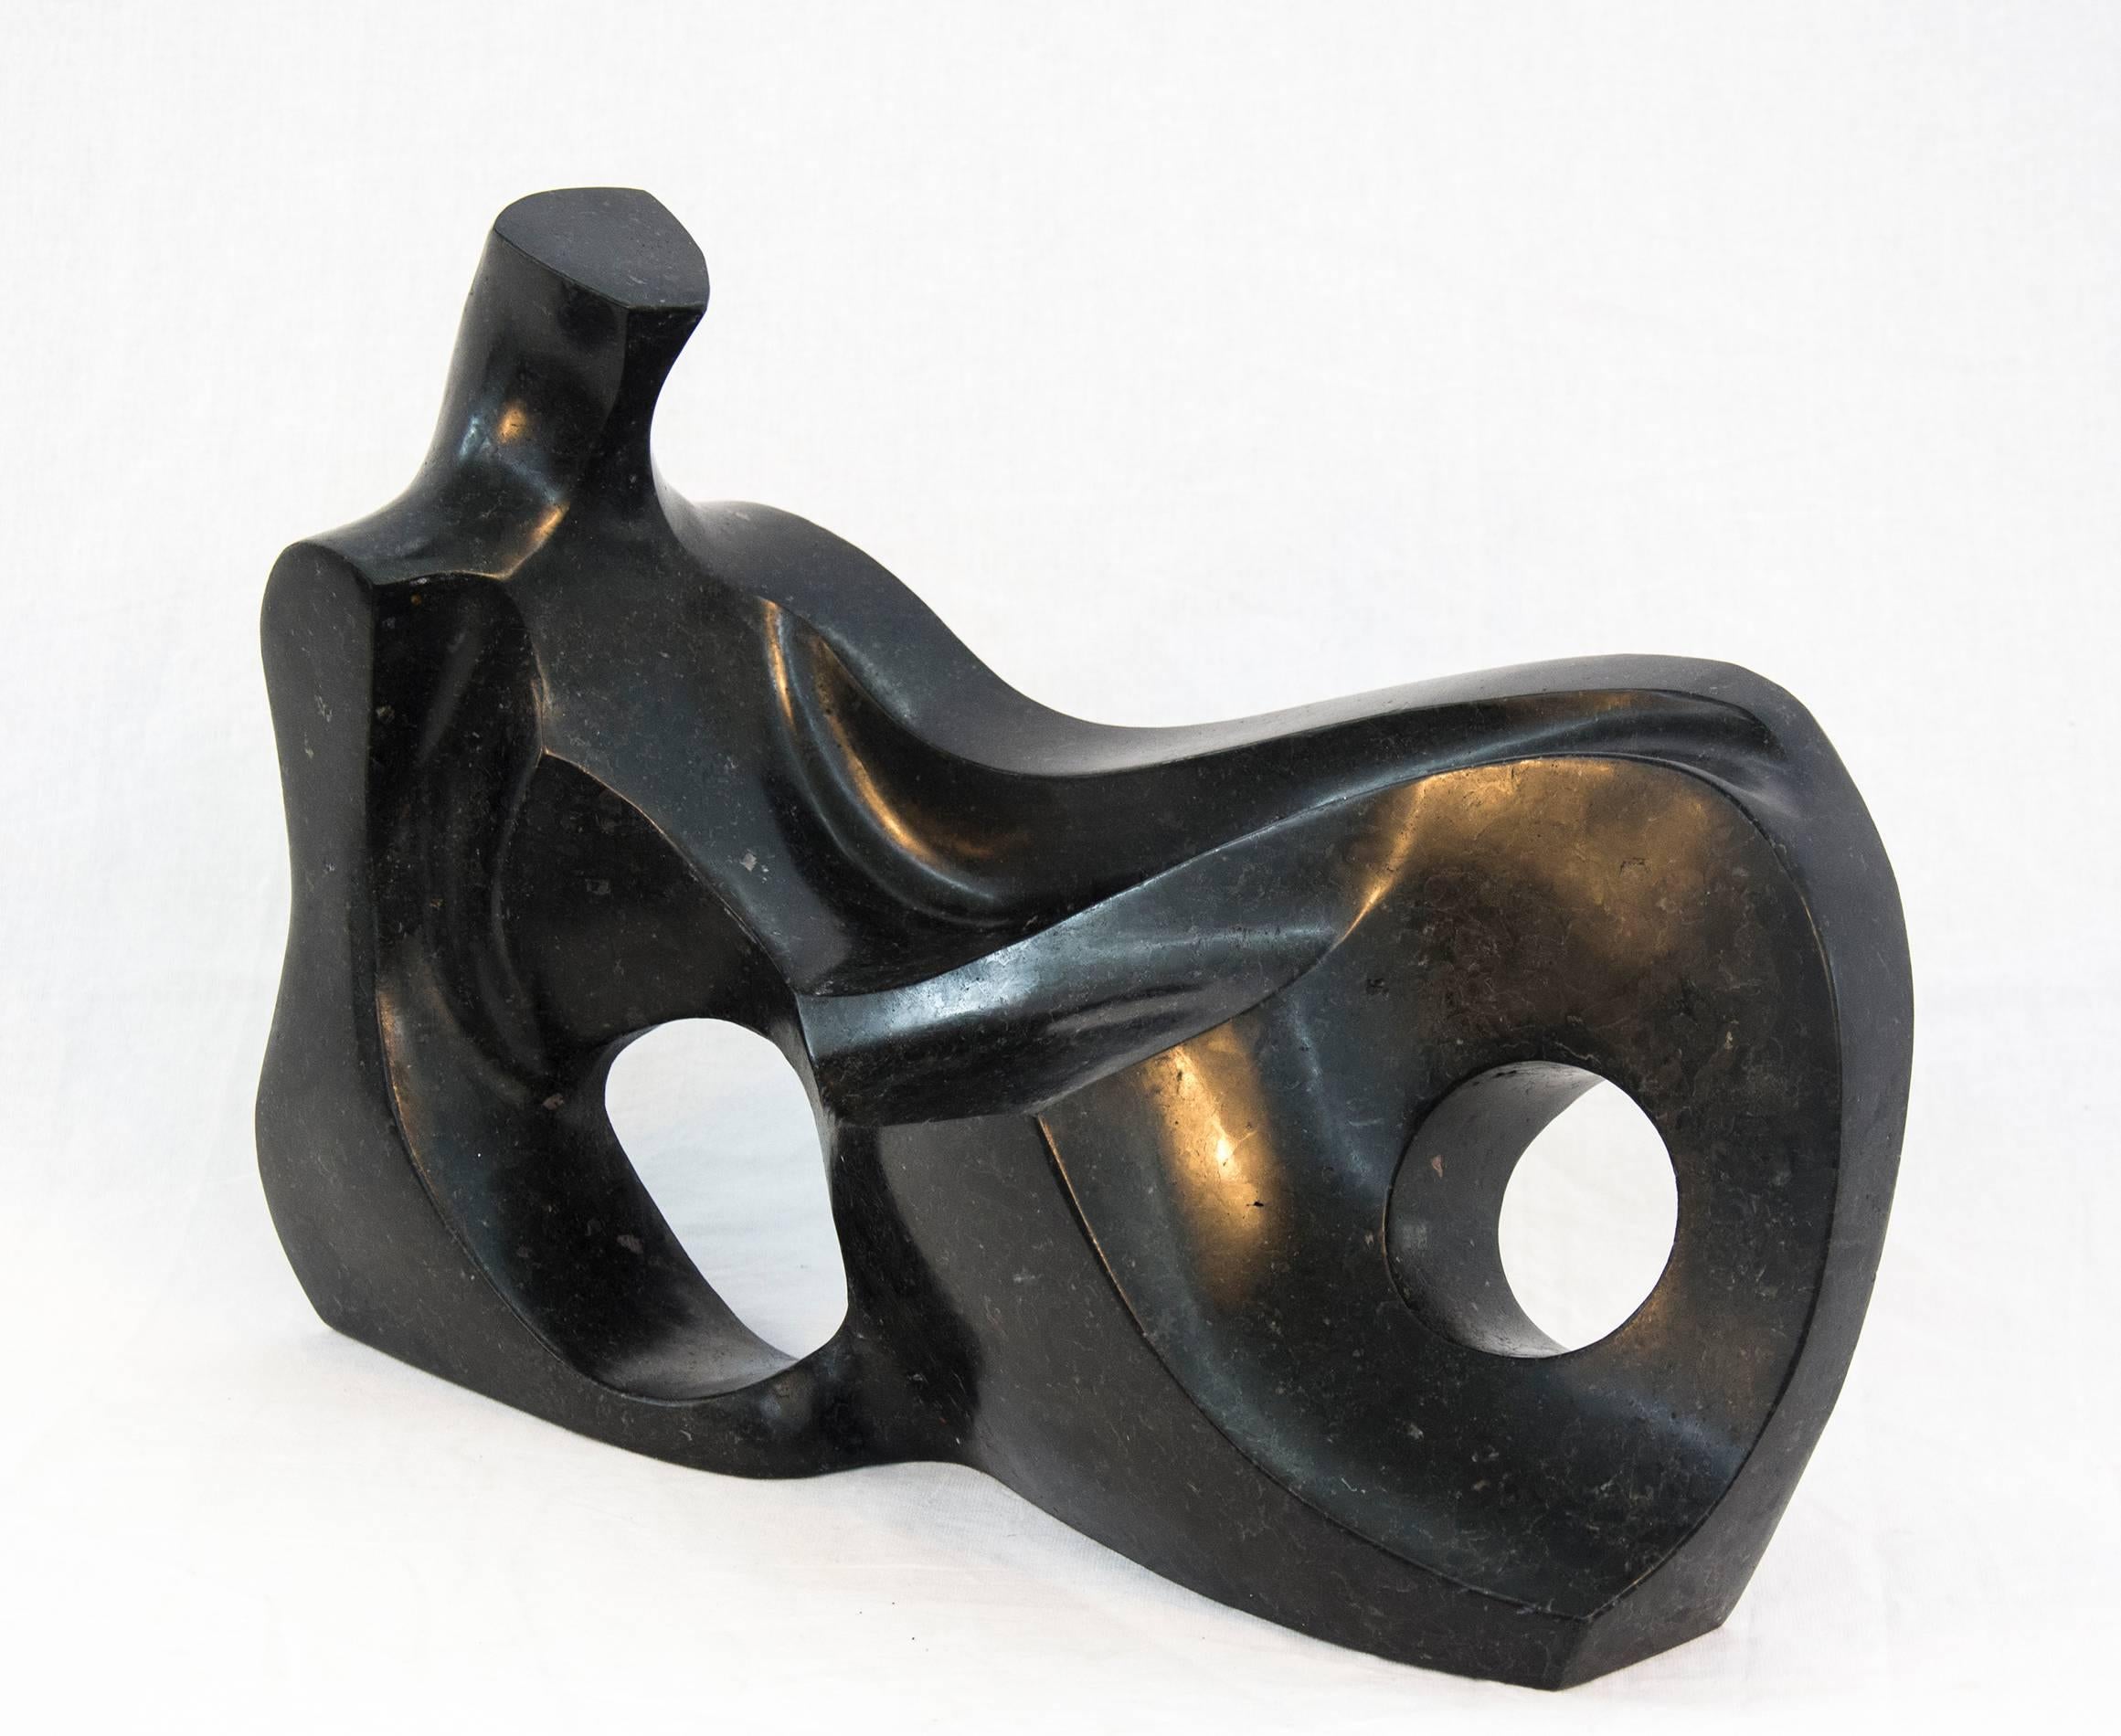 Smooth surfaced, black granite has been engineered intio an elegant and classic depiction of a reclining figure by Jeremy Guy. This work is number 10 in an edition of 50. The formalist play of positive and negative space reveals an inspiration from